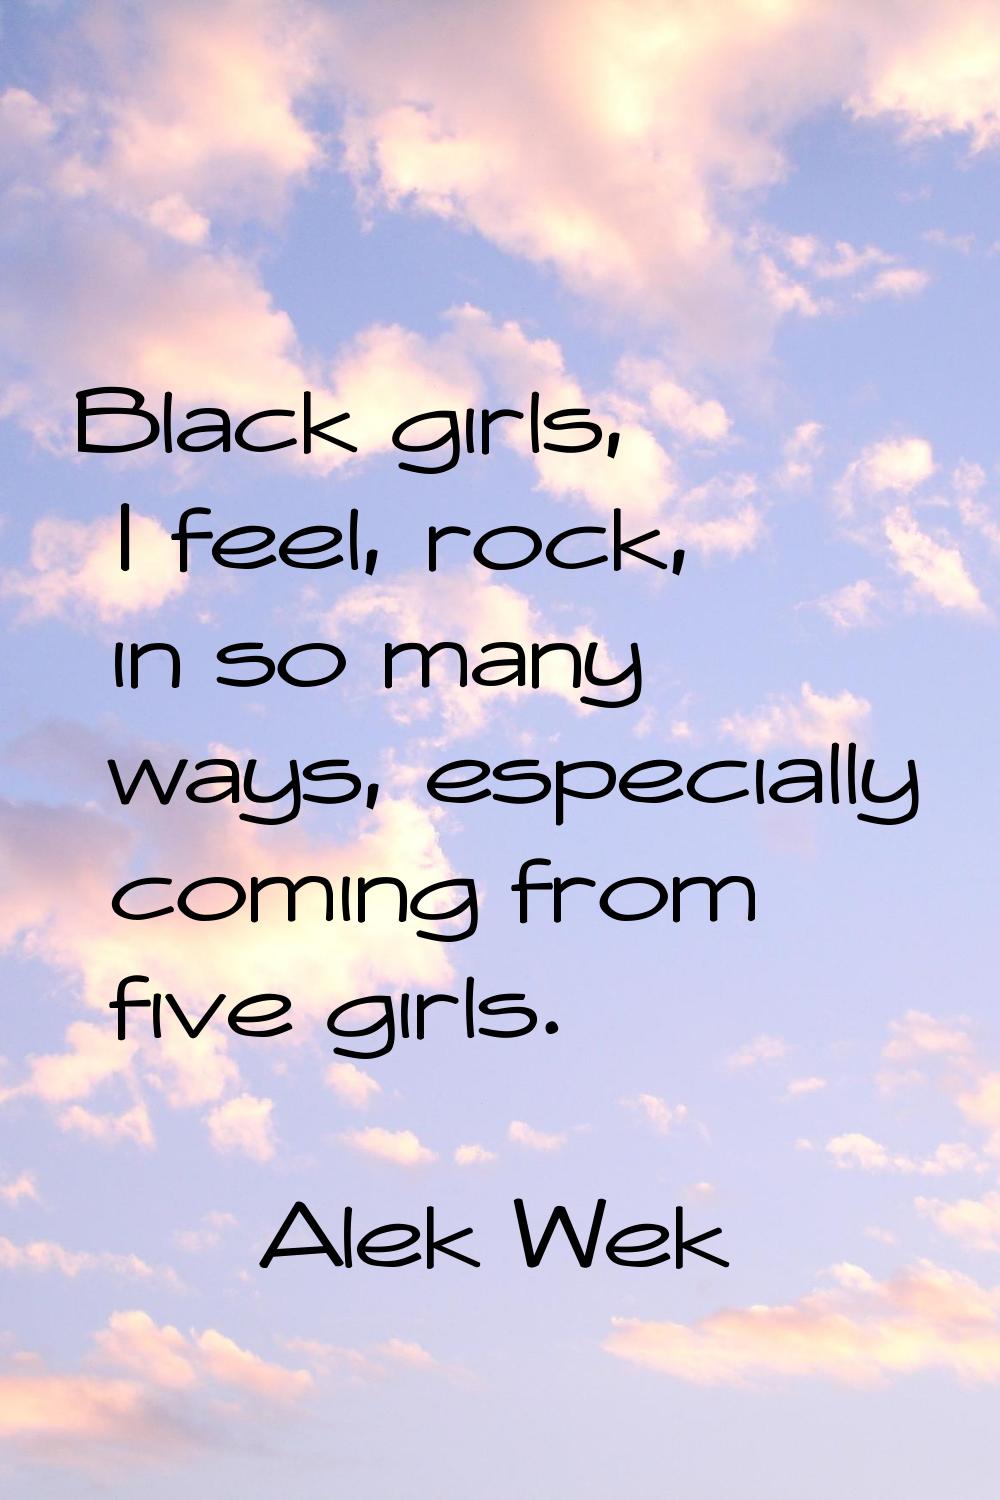 Black girls, I feel, rock, in so many ways, especially coming from five girls.